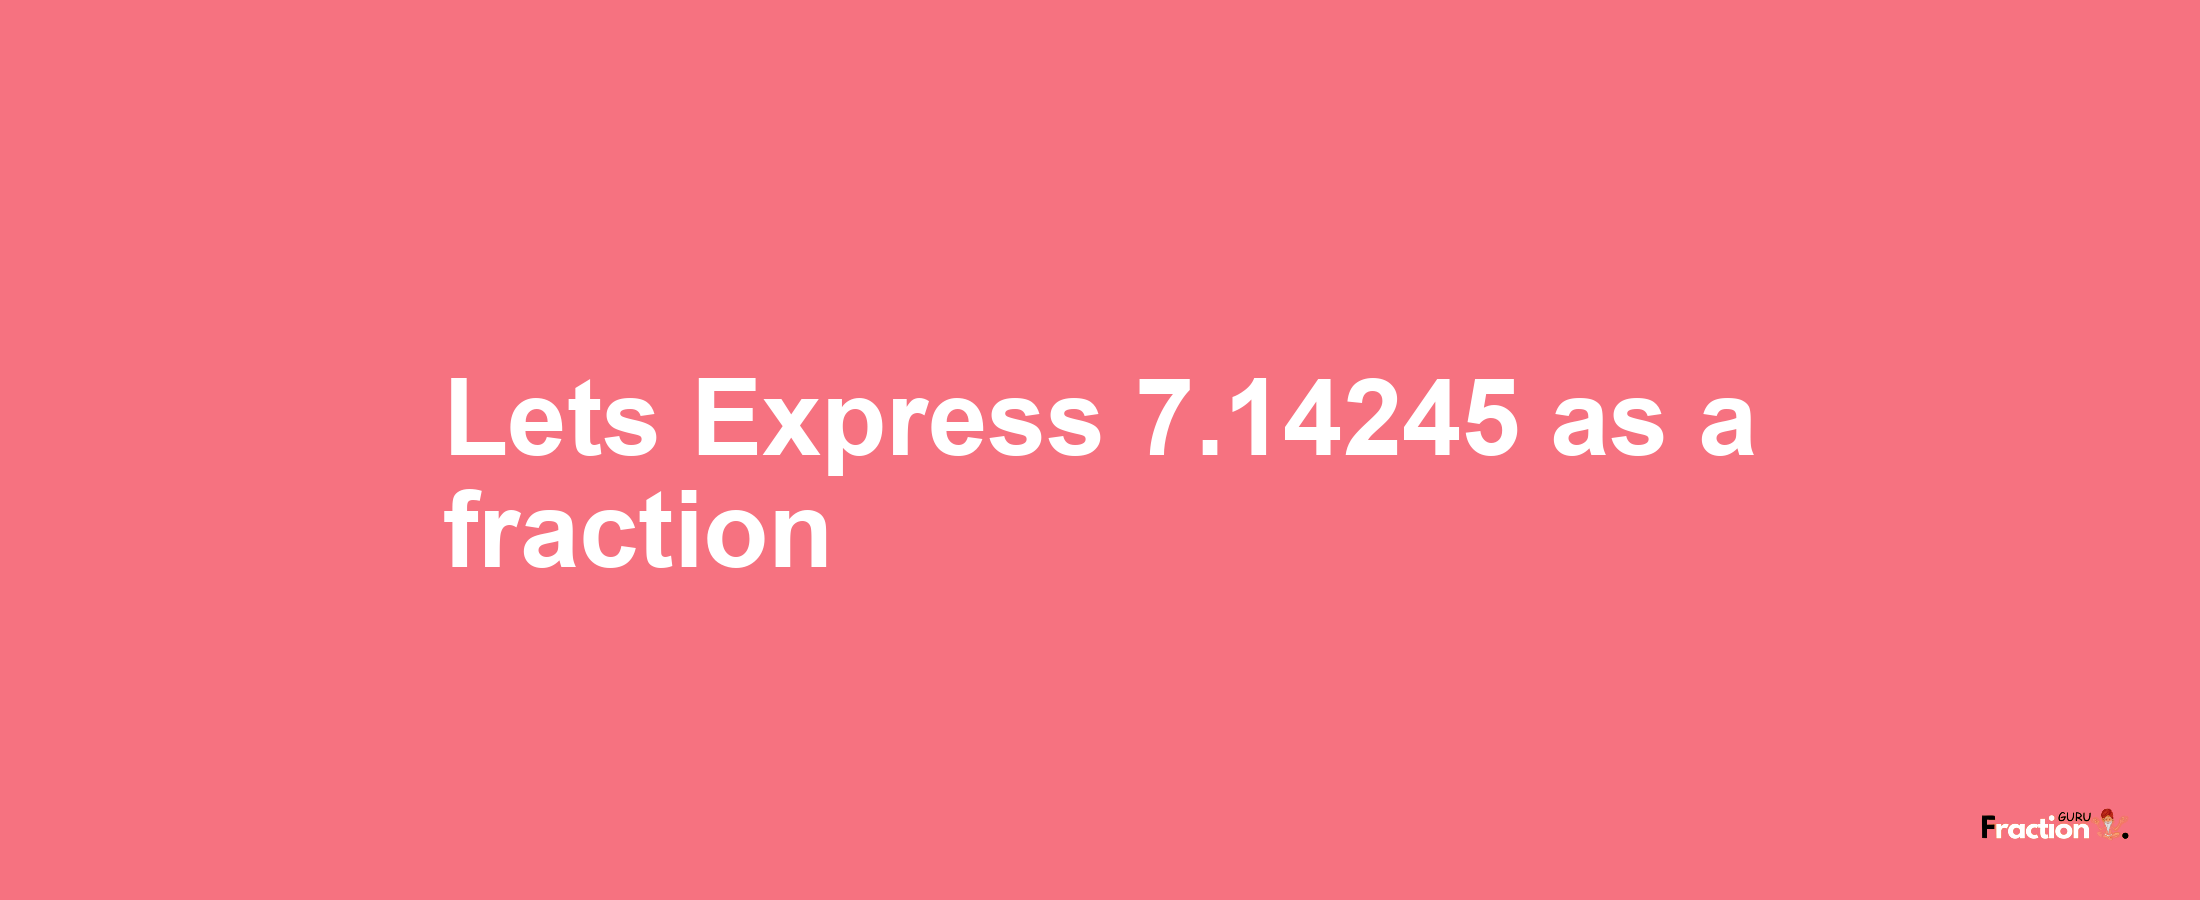 Lets Express 7.14245 as afraction